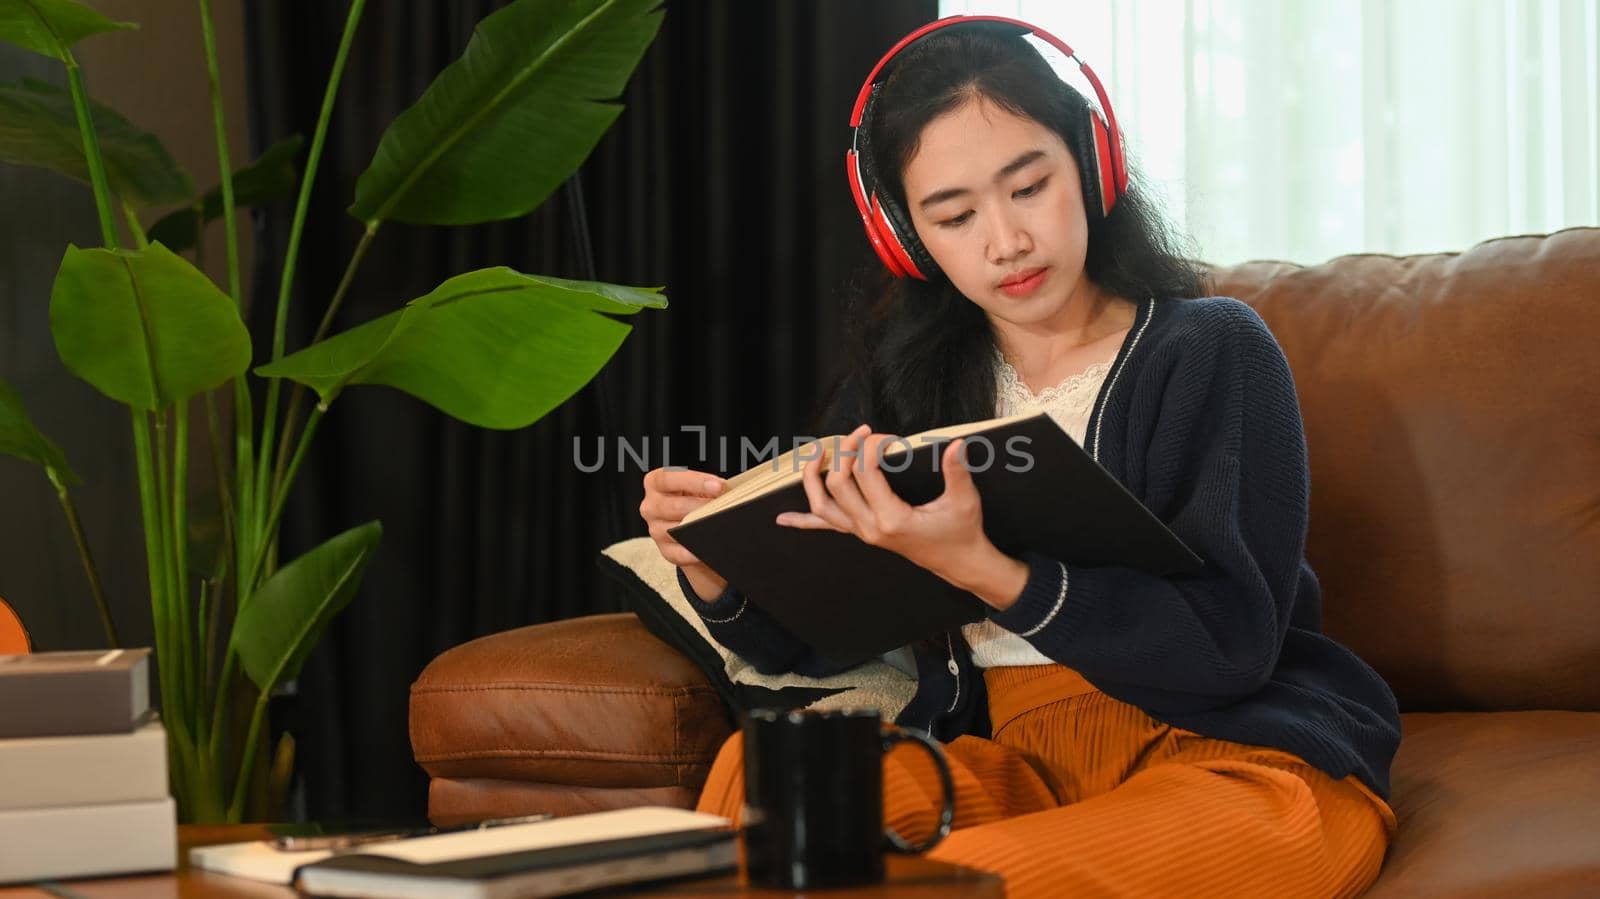 Satisfied young woman listening to music in headphone and reading book on couch at home. Leisure activity, positive mood concept by prathanchorruangsak